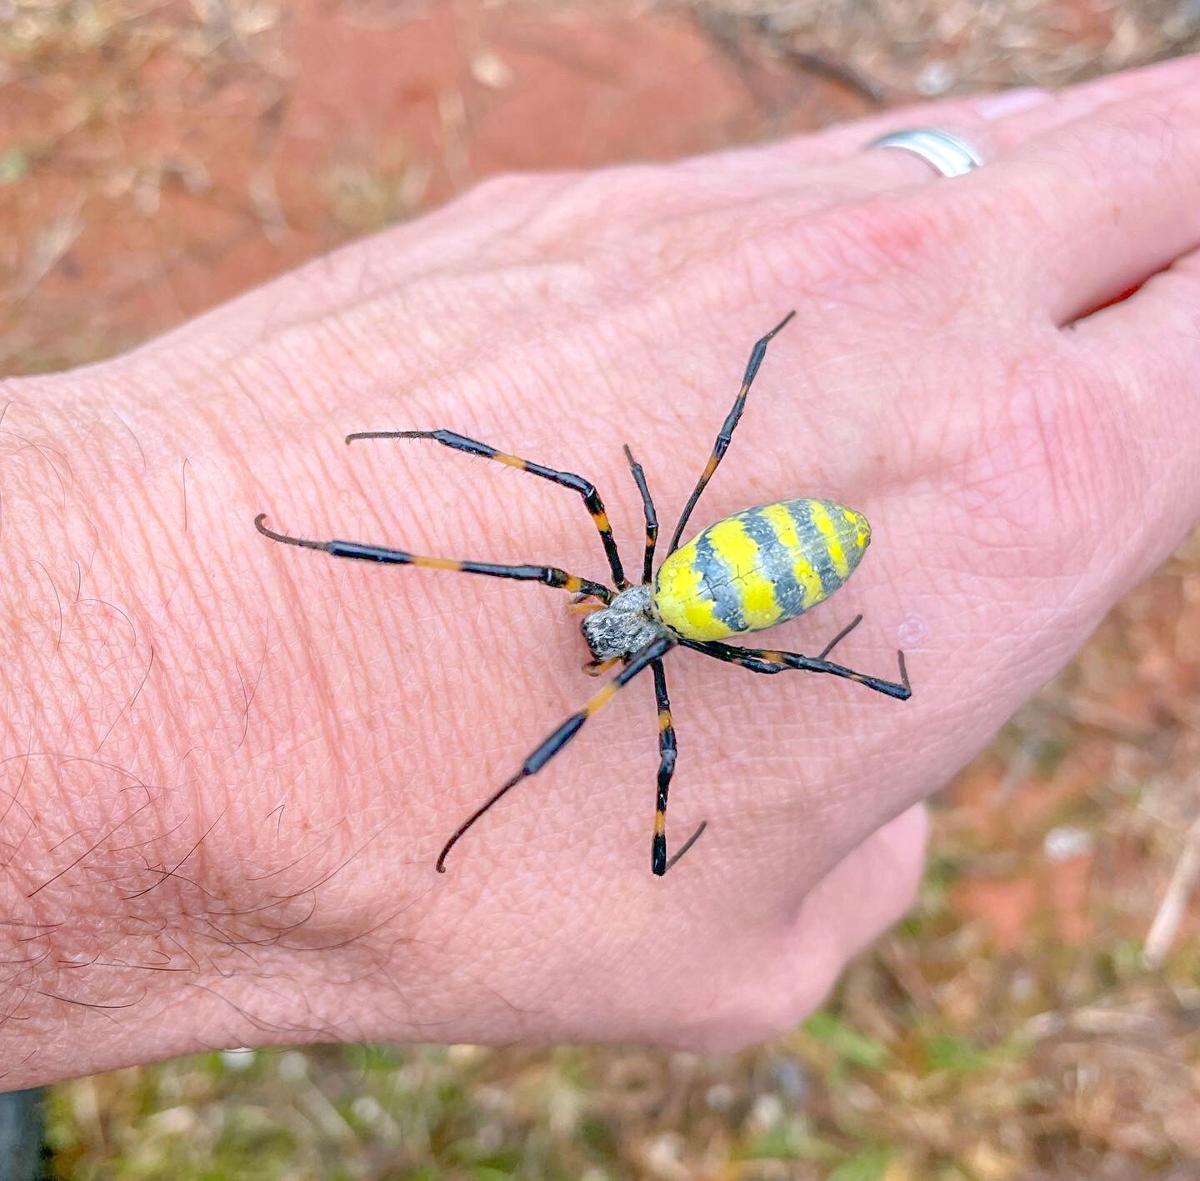 New spider species discovered in Johnson County